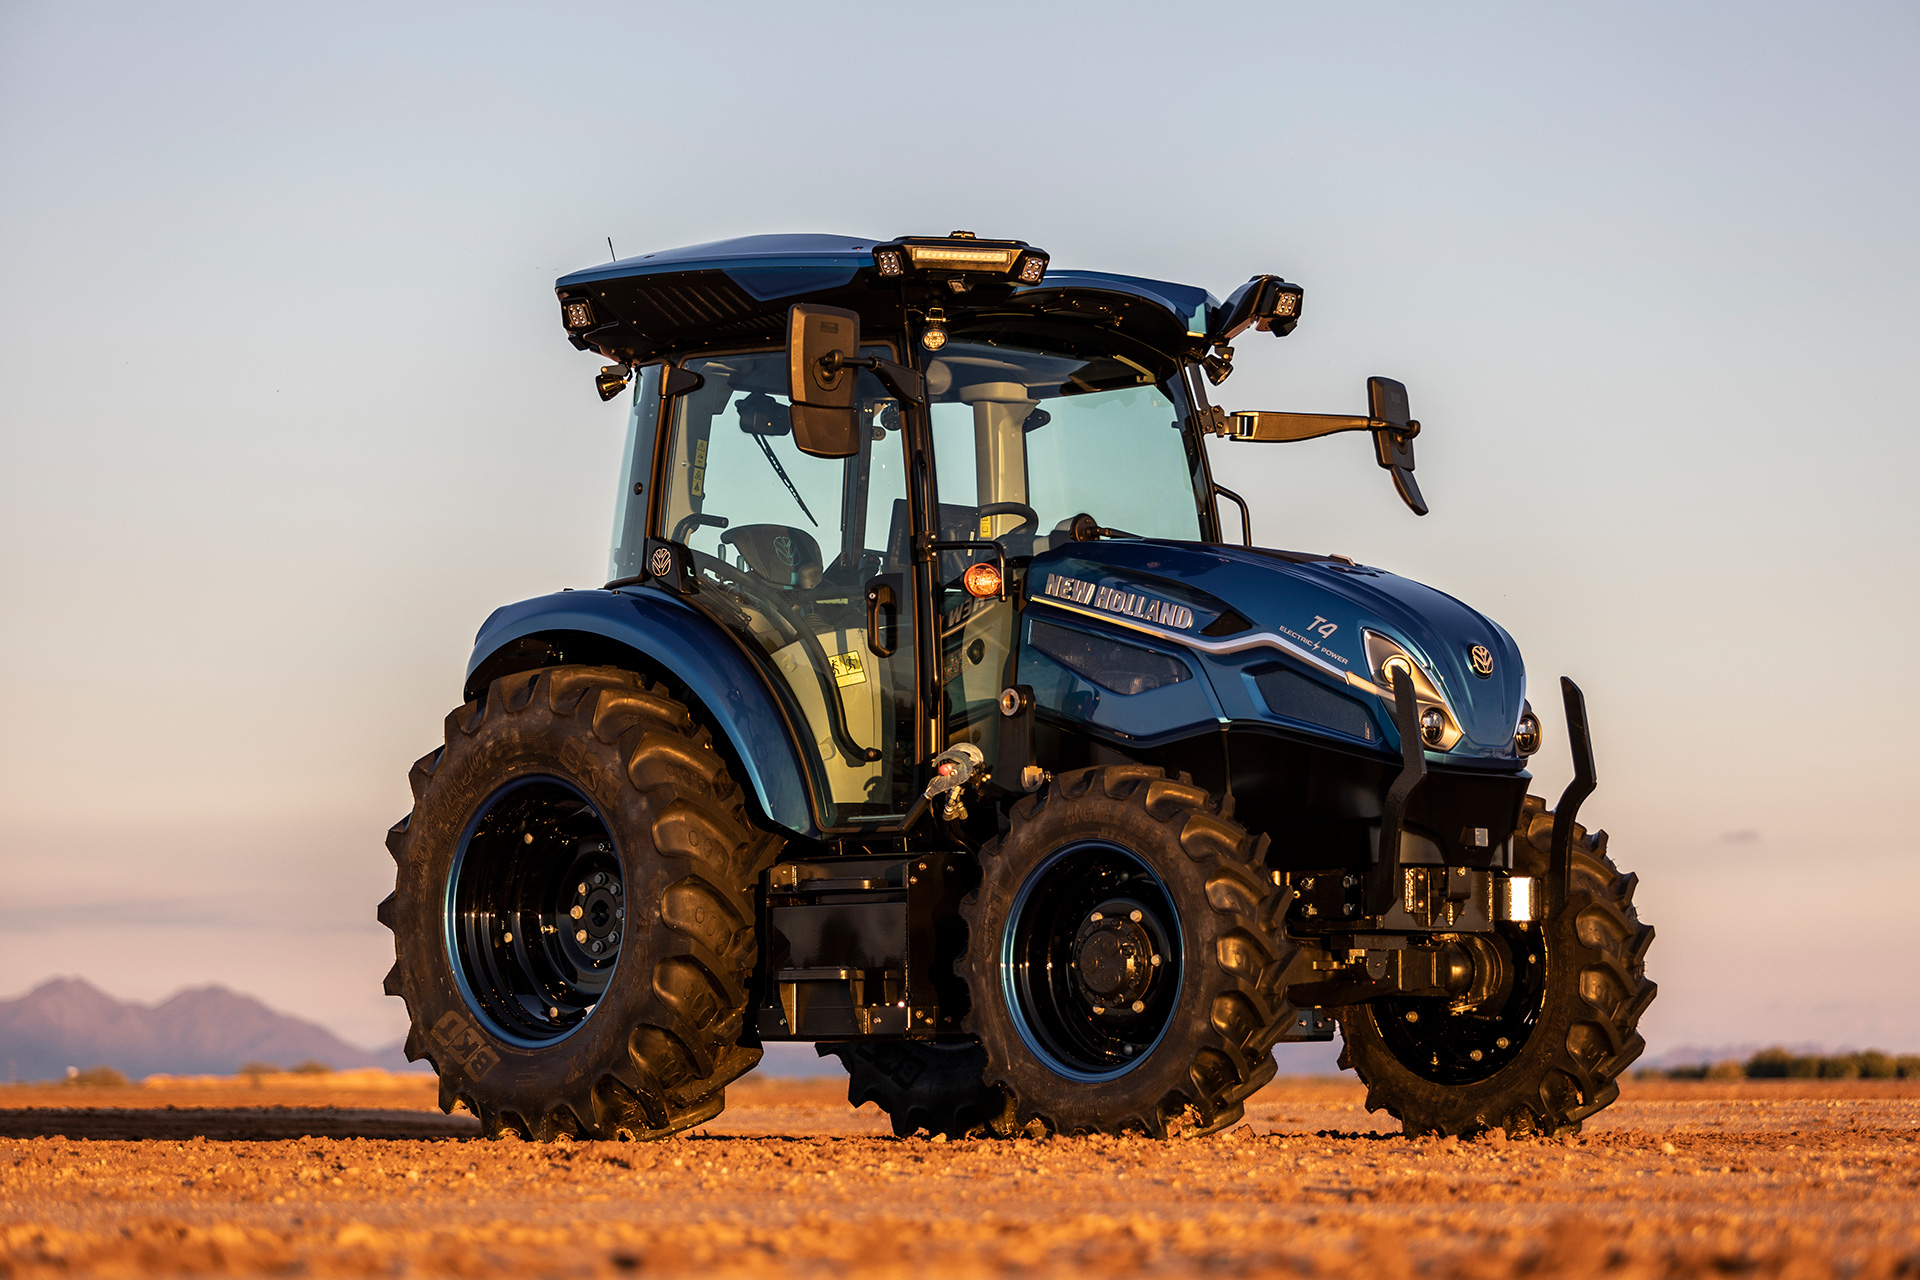 Self-driving electrical tractor guarantees eco-friendly, hands-off farming | Engadget